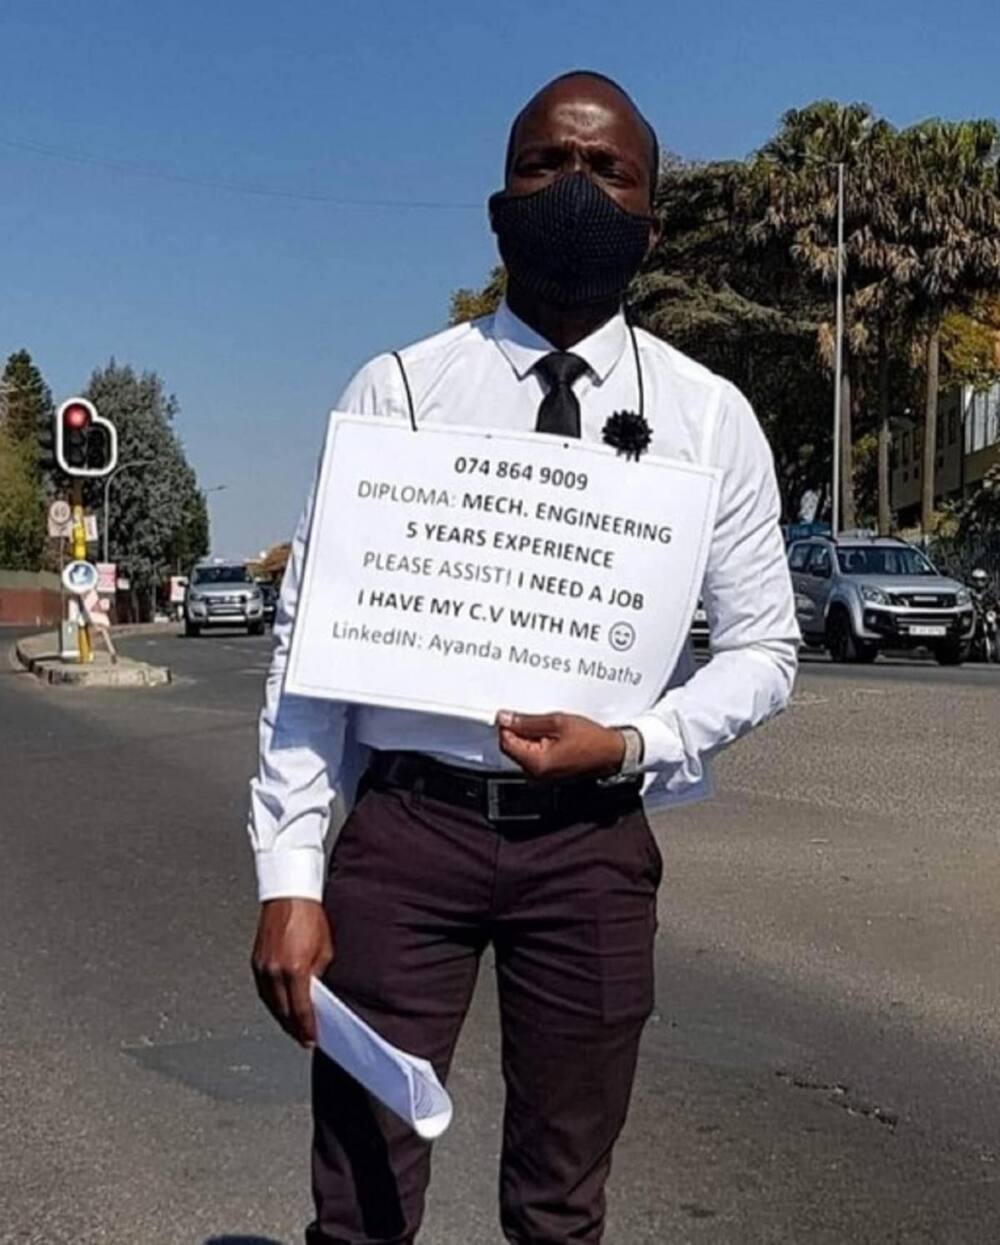 Man looking for job at traffic light goes viral, Mzansi offers help